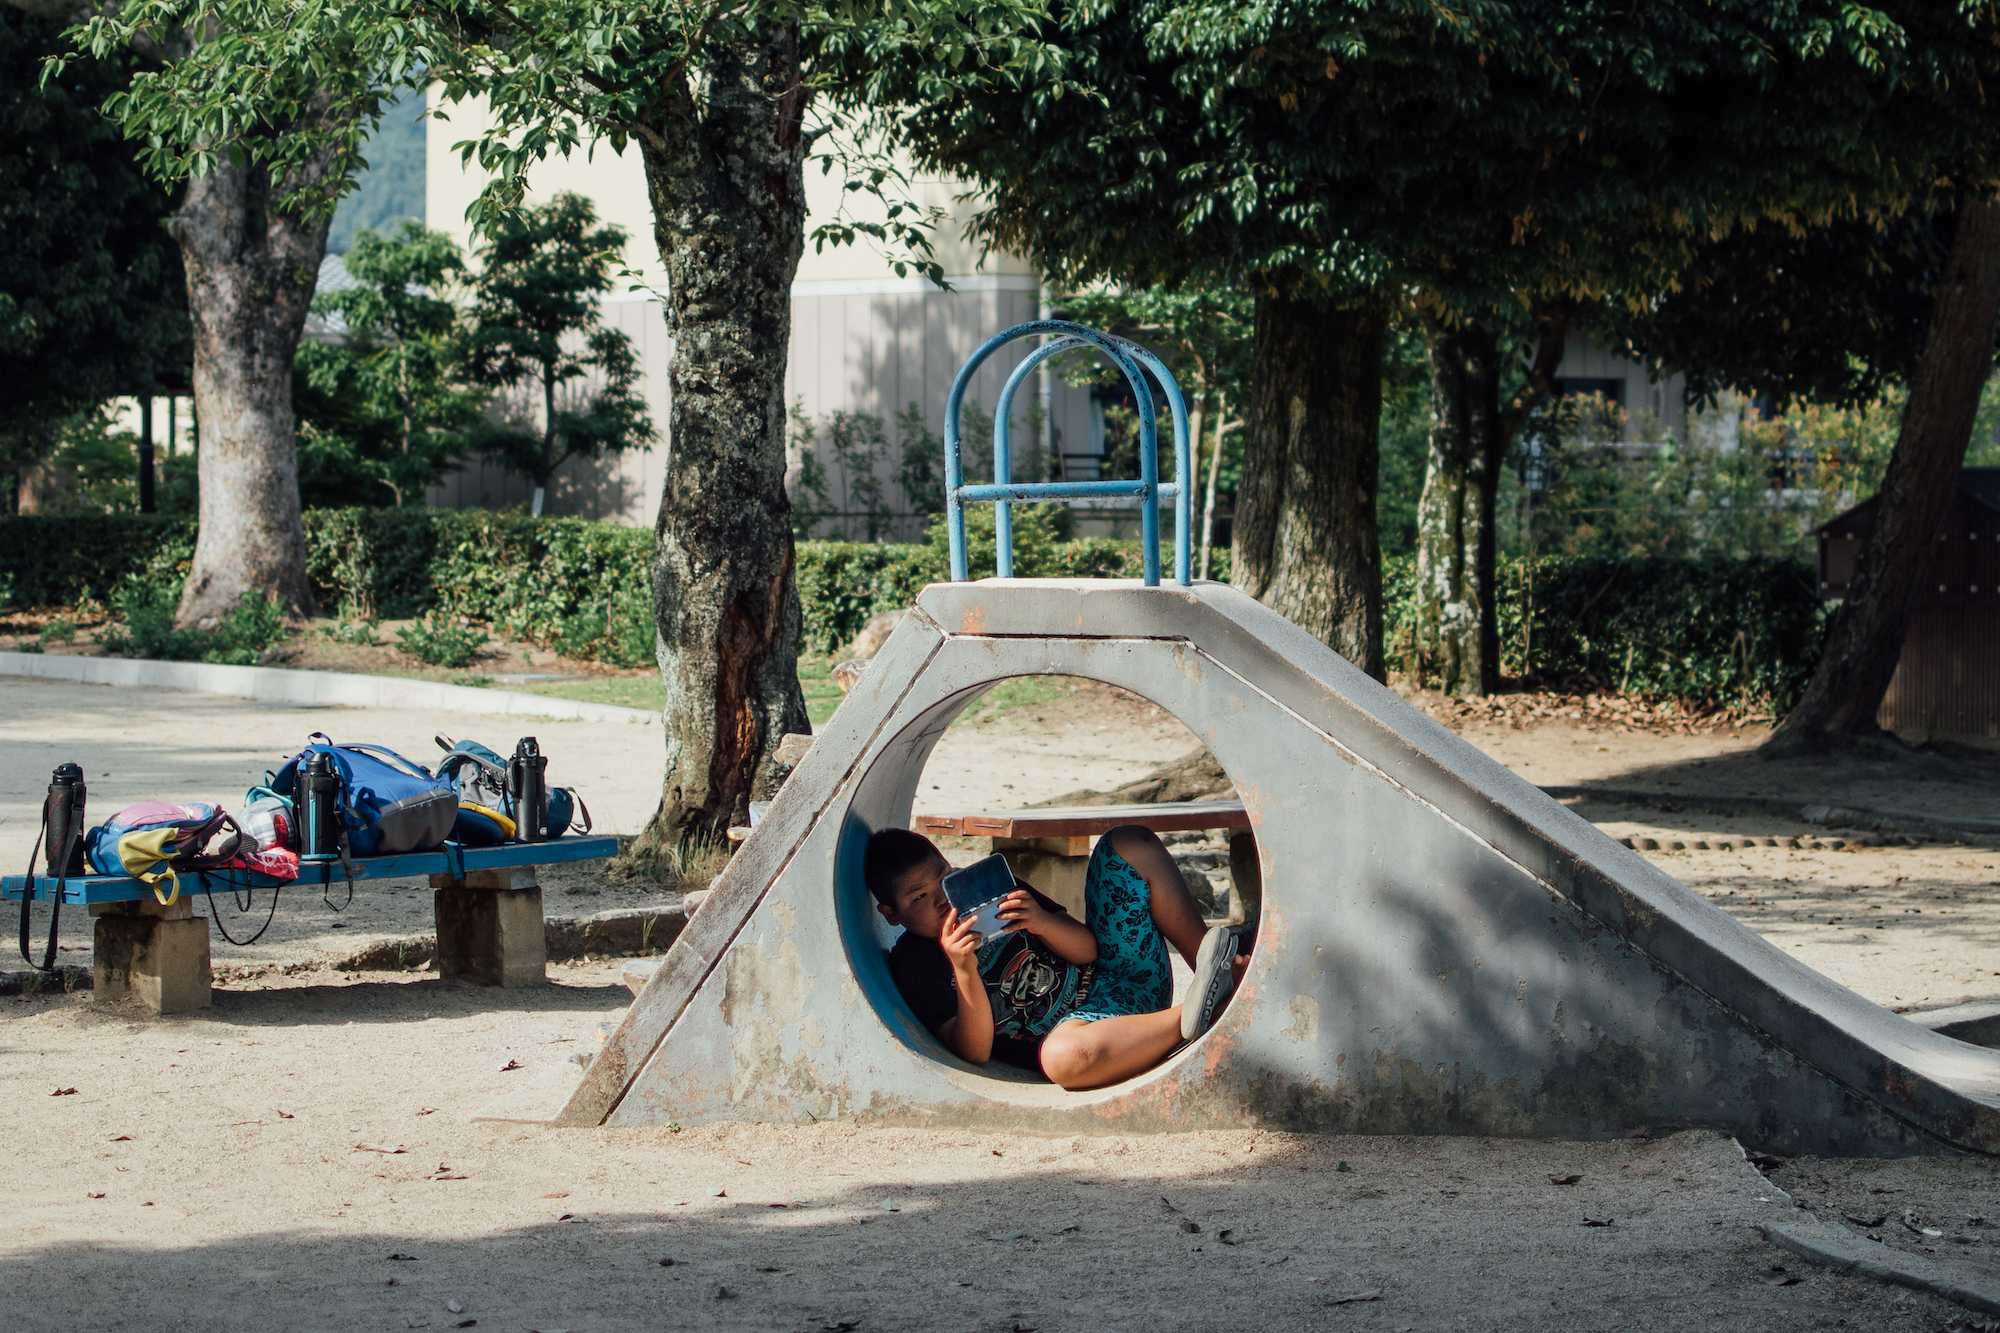 A boy curls up underneath a slide to play his Nintendo DS.